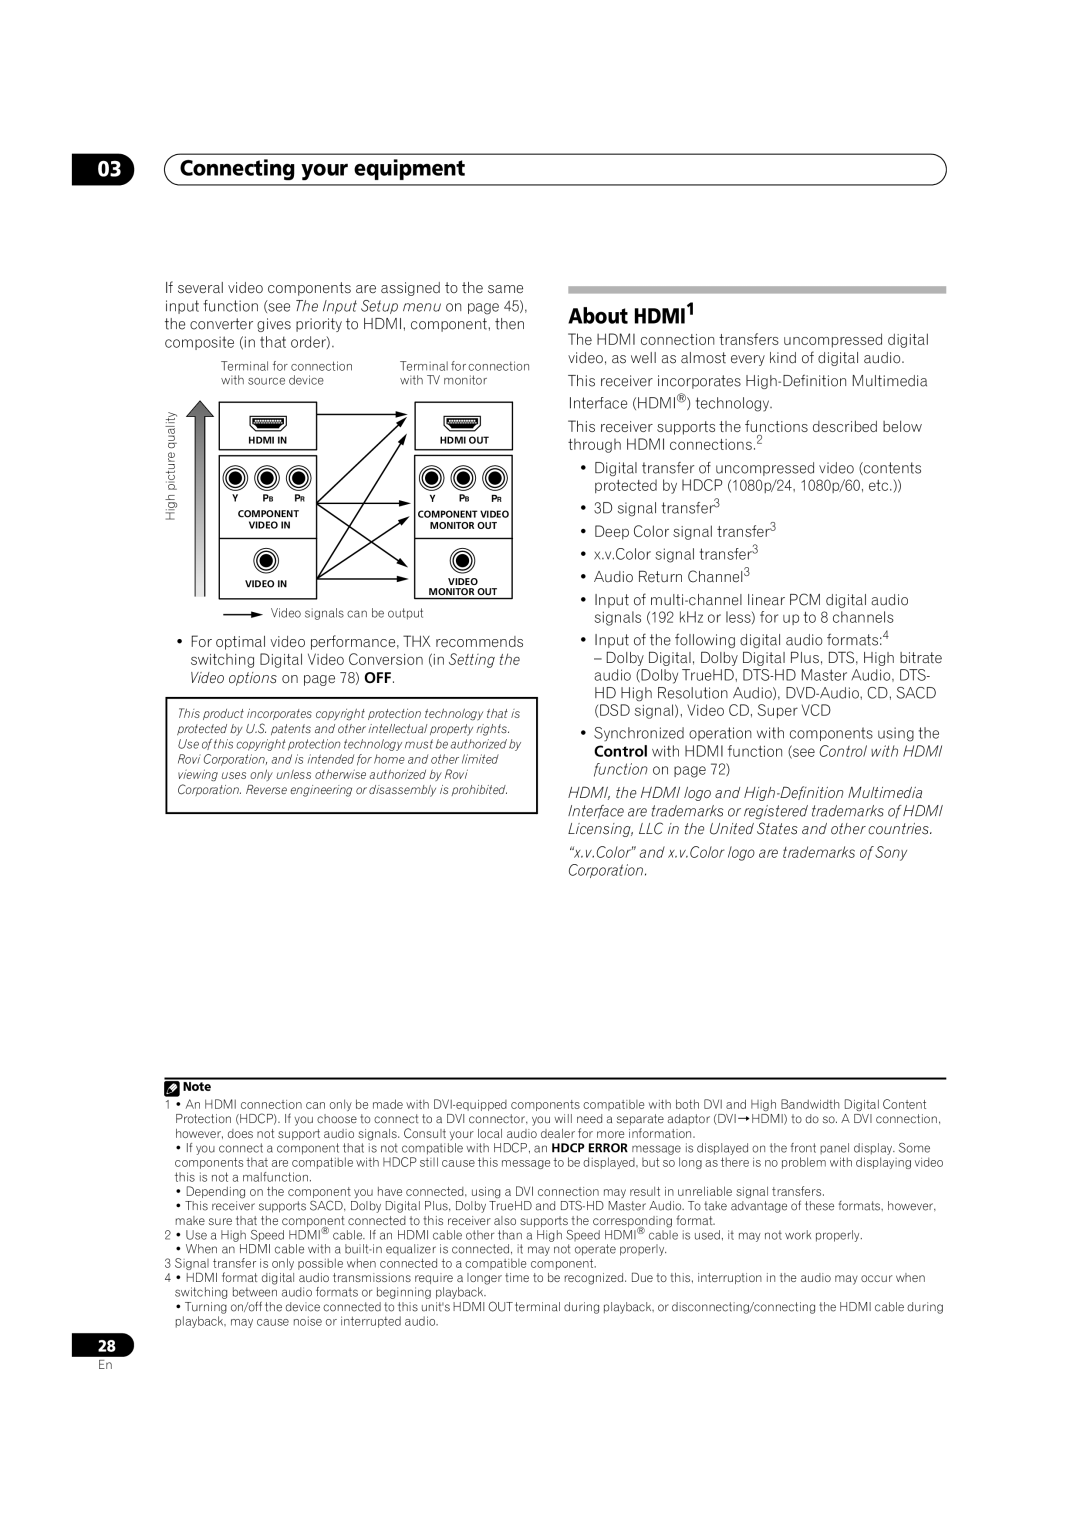 Pioneer SC-35 manual About HDMI1, 03Connecting your equipment 